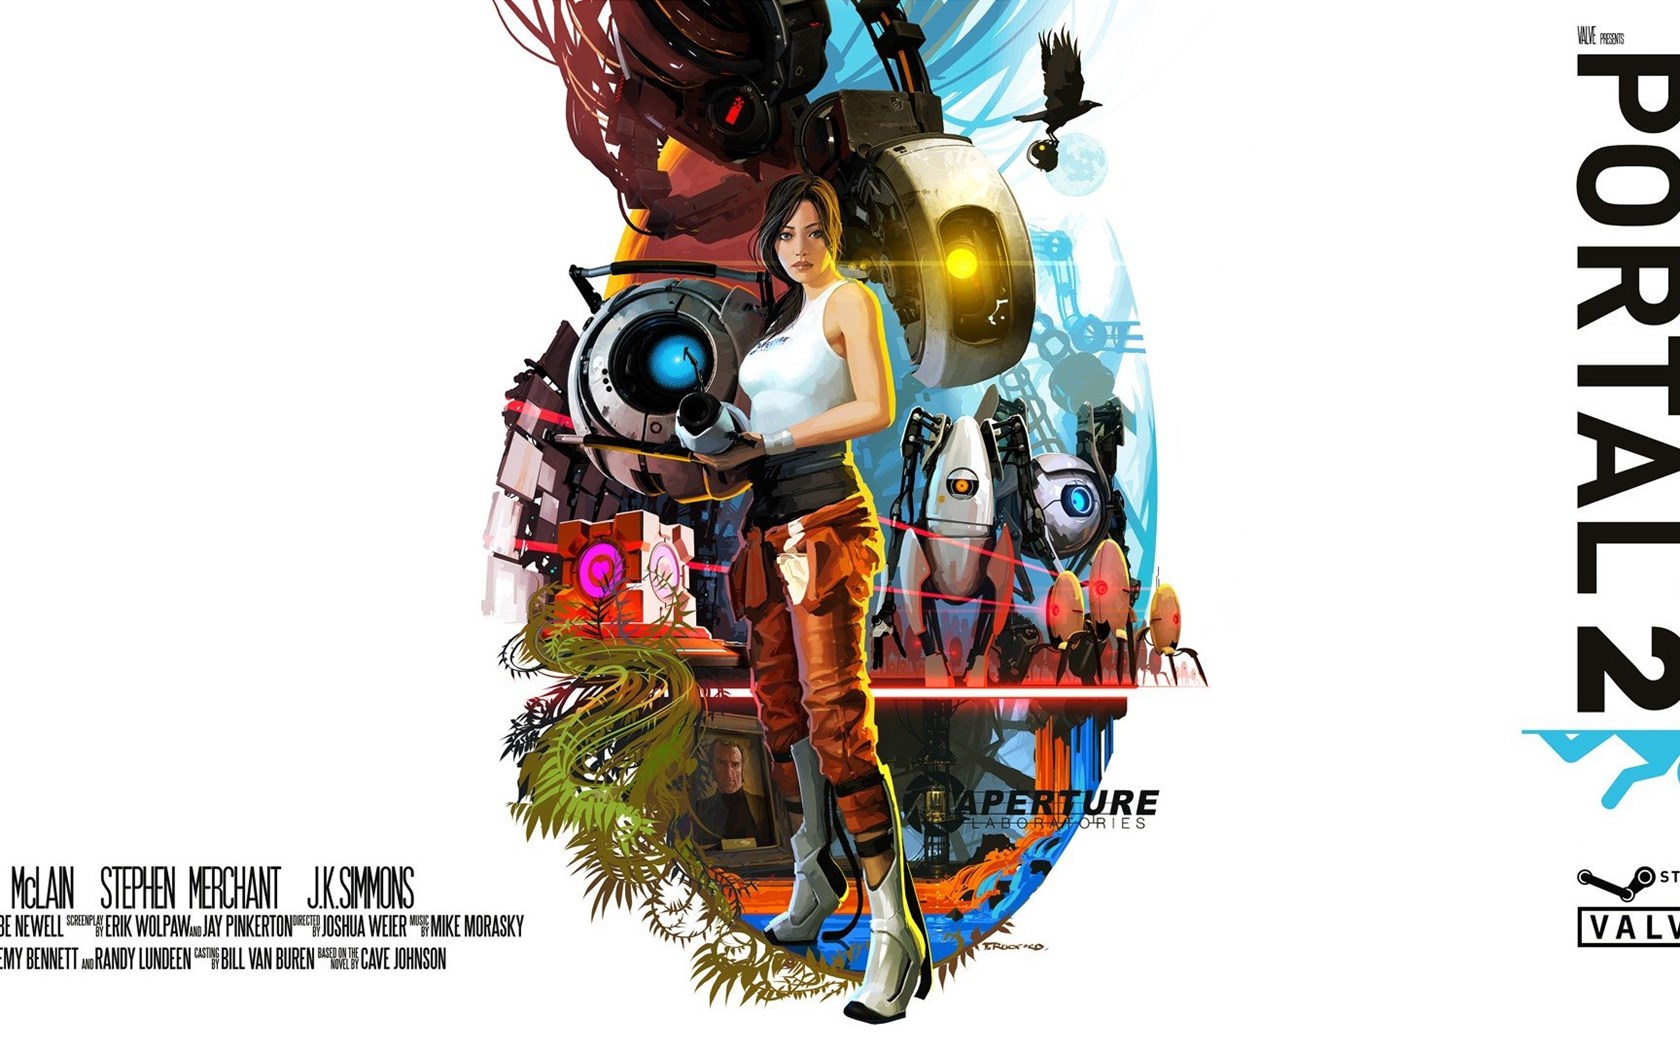 Download The Portal 2 By Valve Wallpaper Portal 2 By Valve